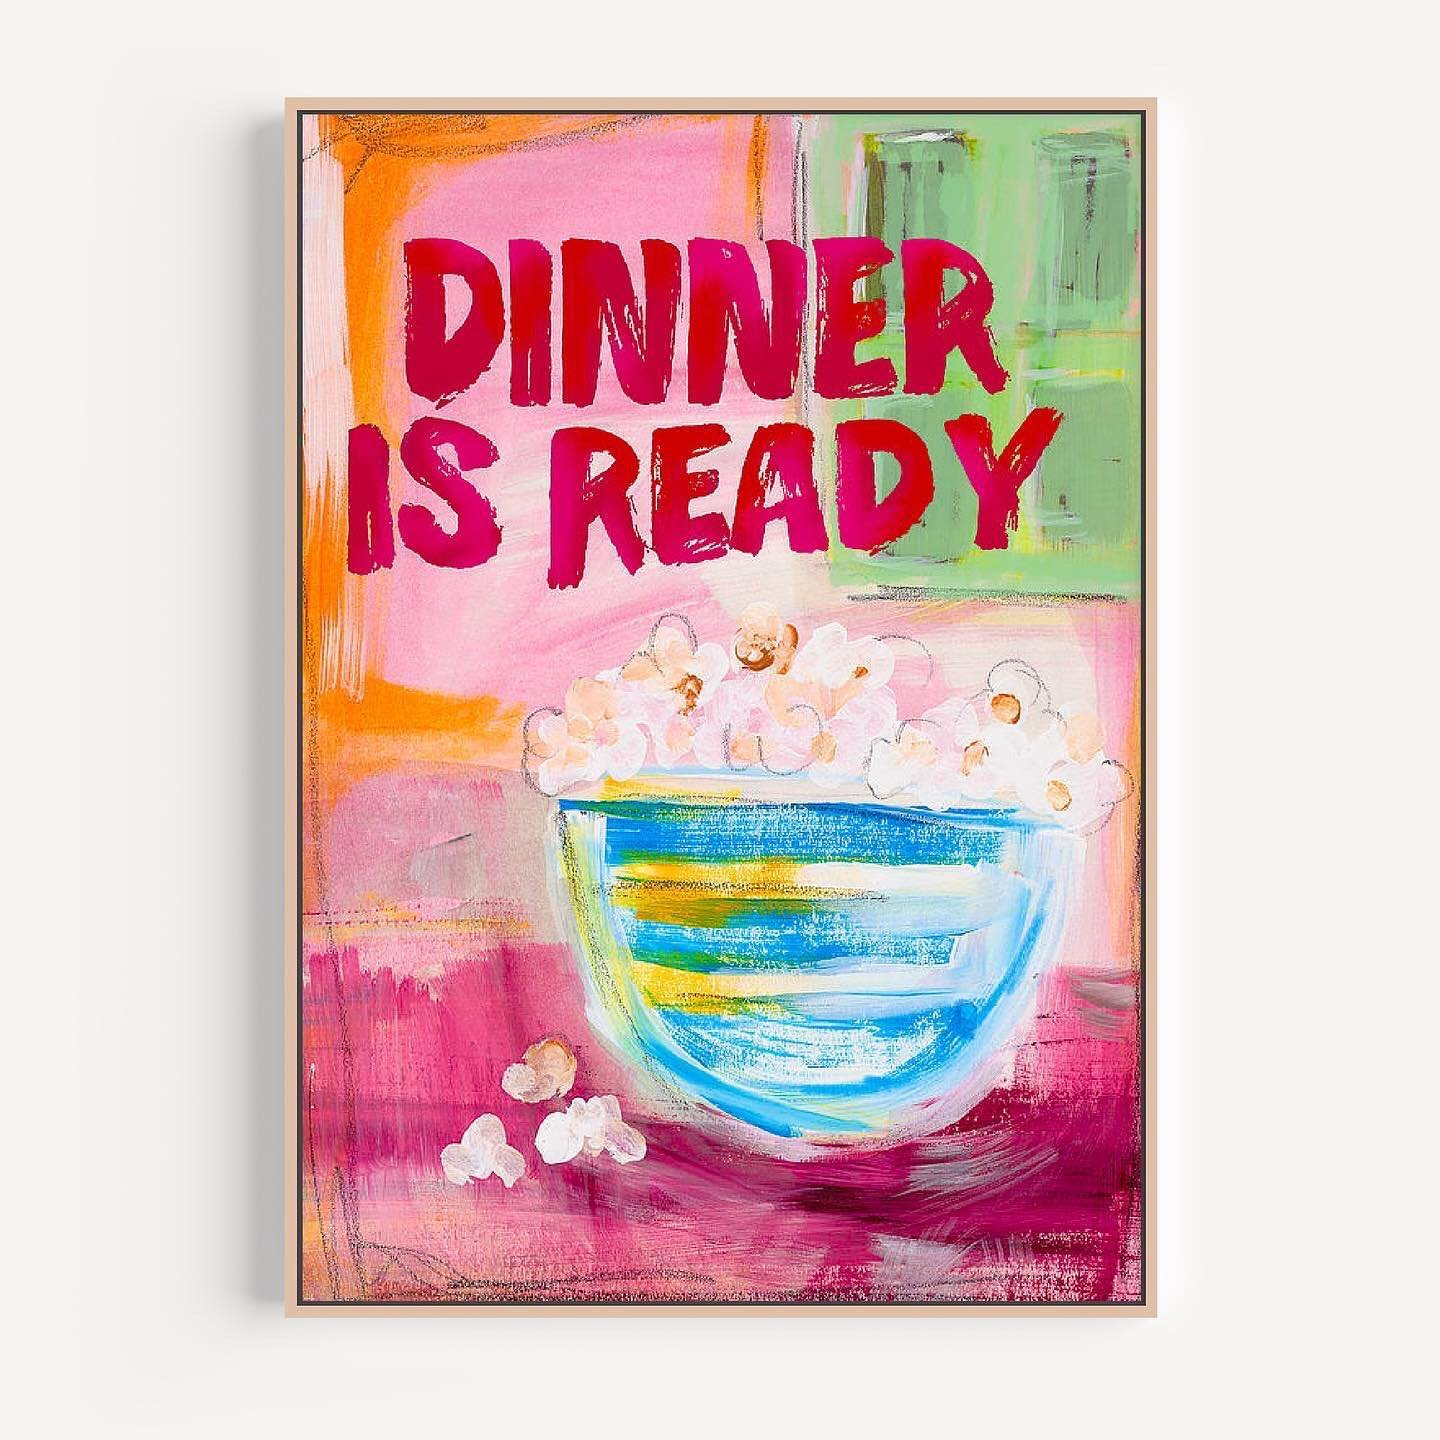 I hope all the moms get a break from being asked what&rsquo;s for dinner or making dinner today.

Title: Popcorn For Dinner
Prints for all size spaces and budgets are available in my shop. Link in bio @lindawoodsart